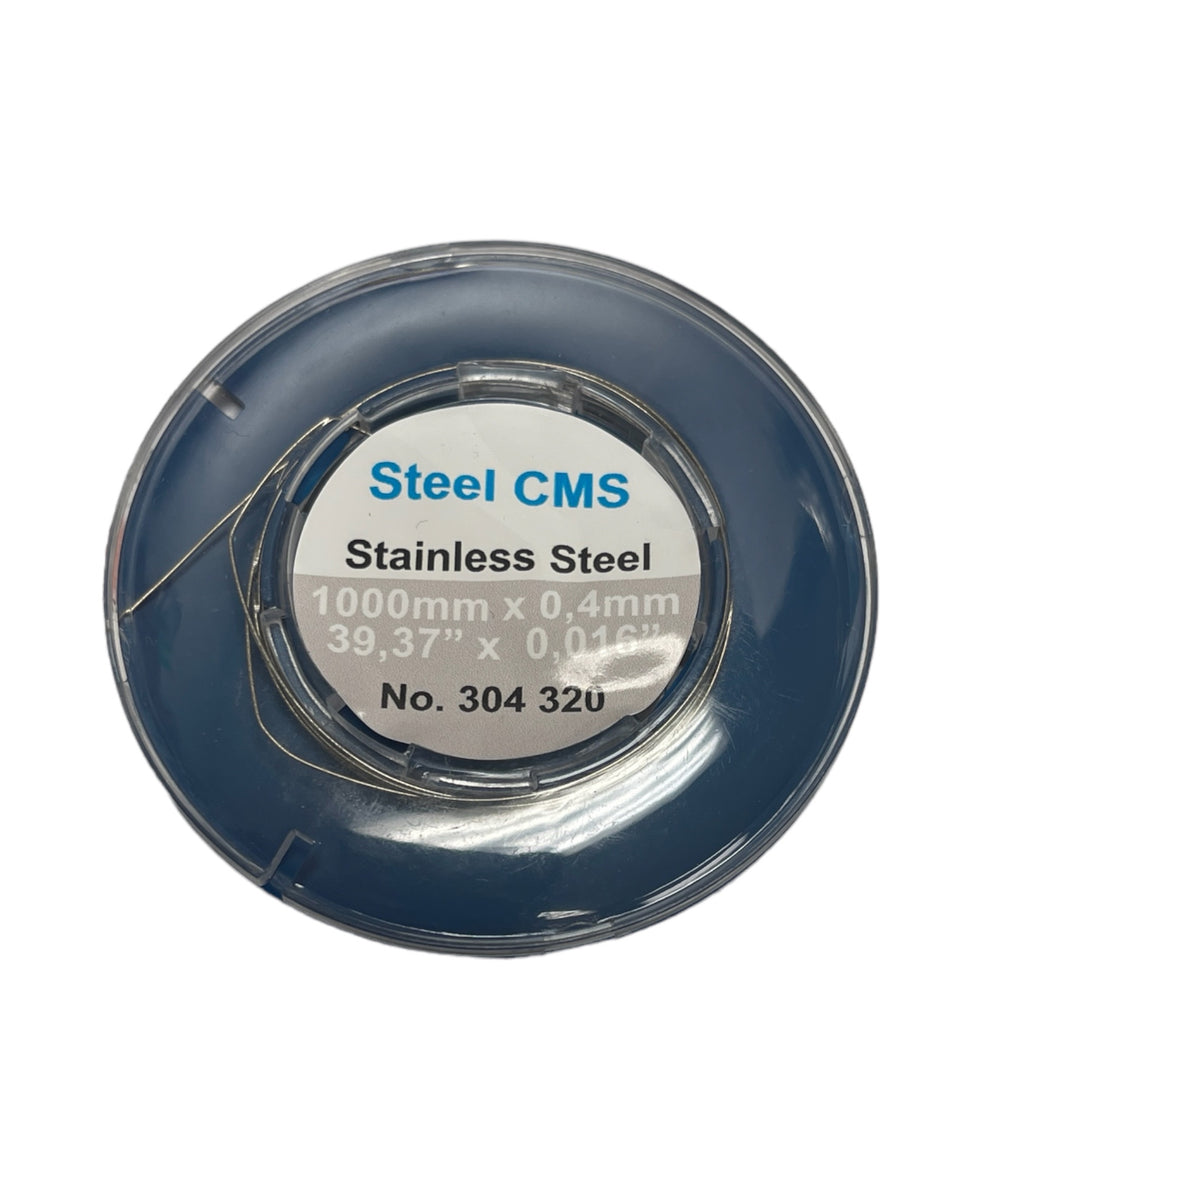 Stainless steel CMS